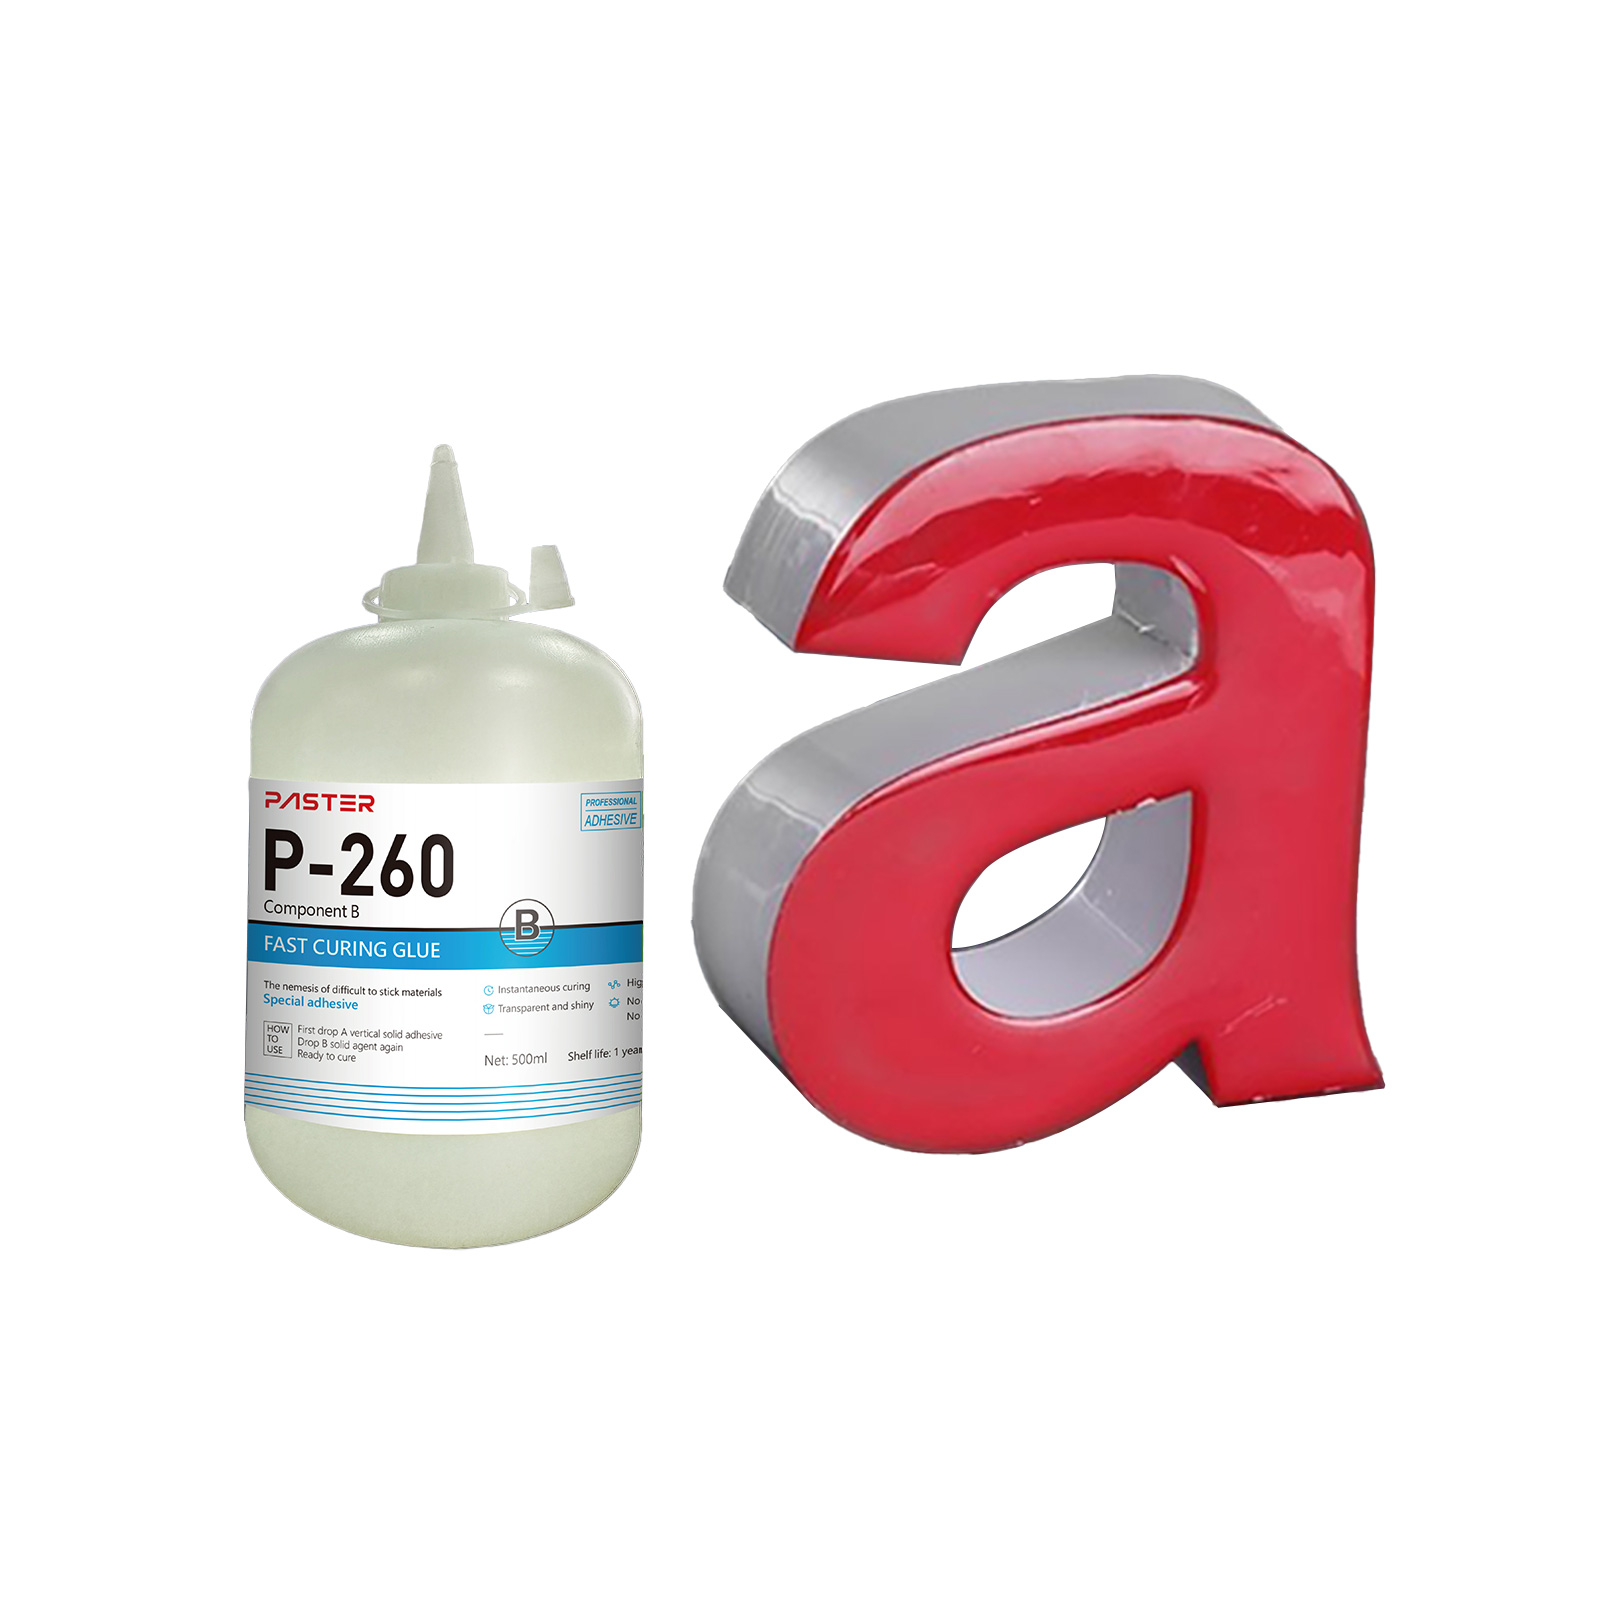 P-260B FAST CURING GLUE for Channel Letter